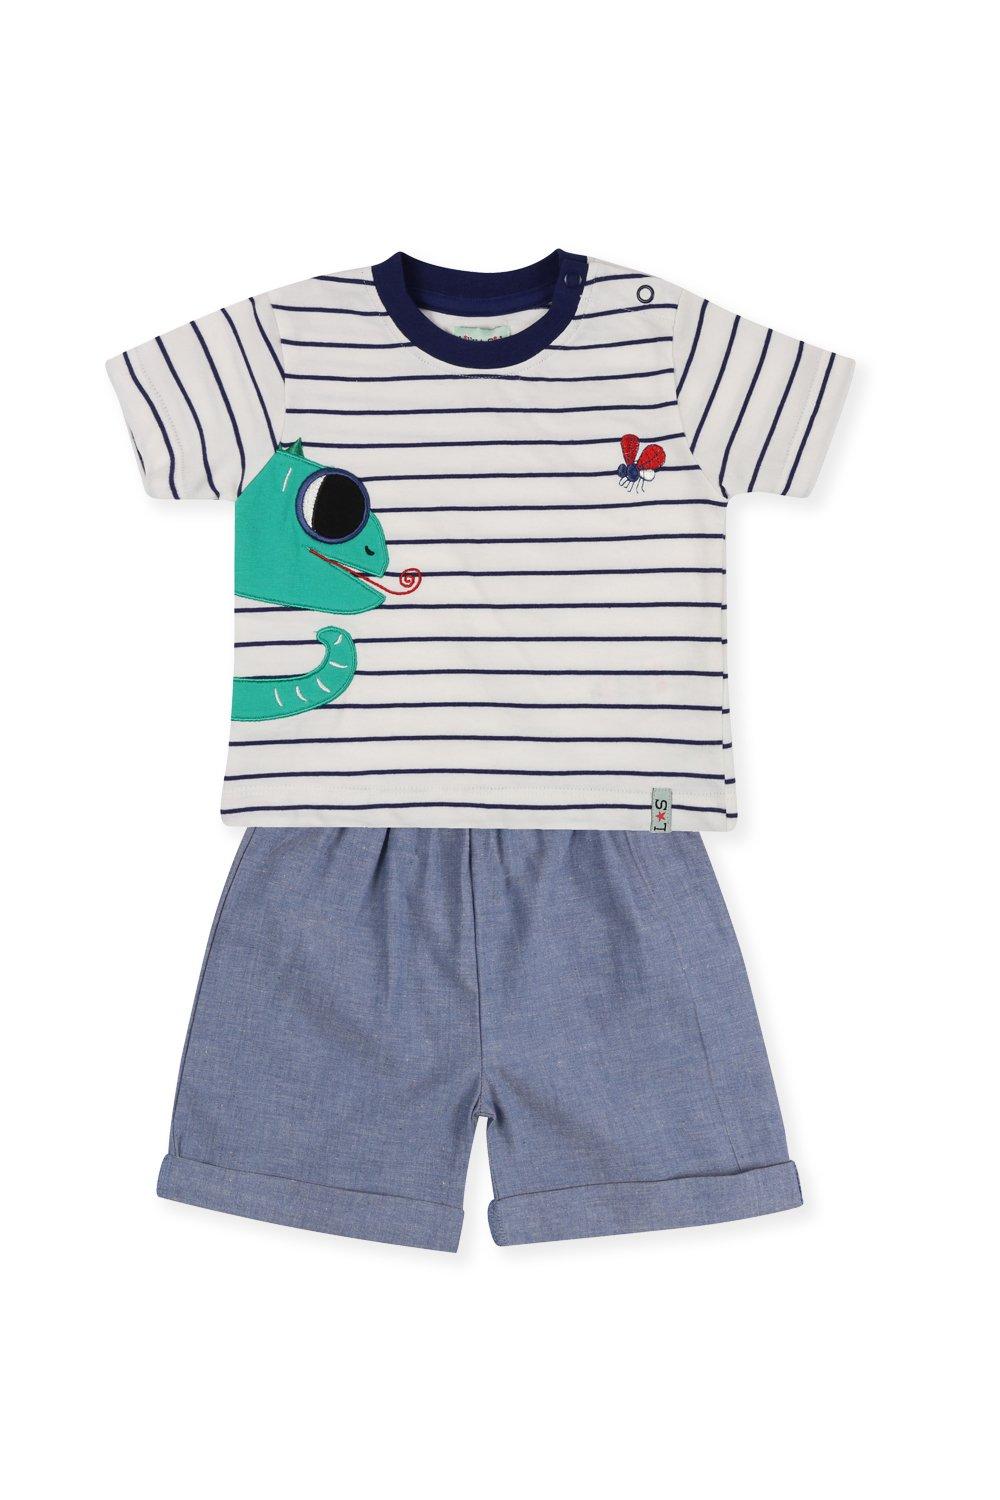 Lizard Applique T And Chambray Short Set